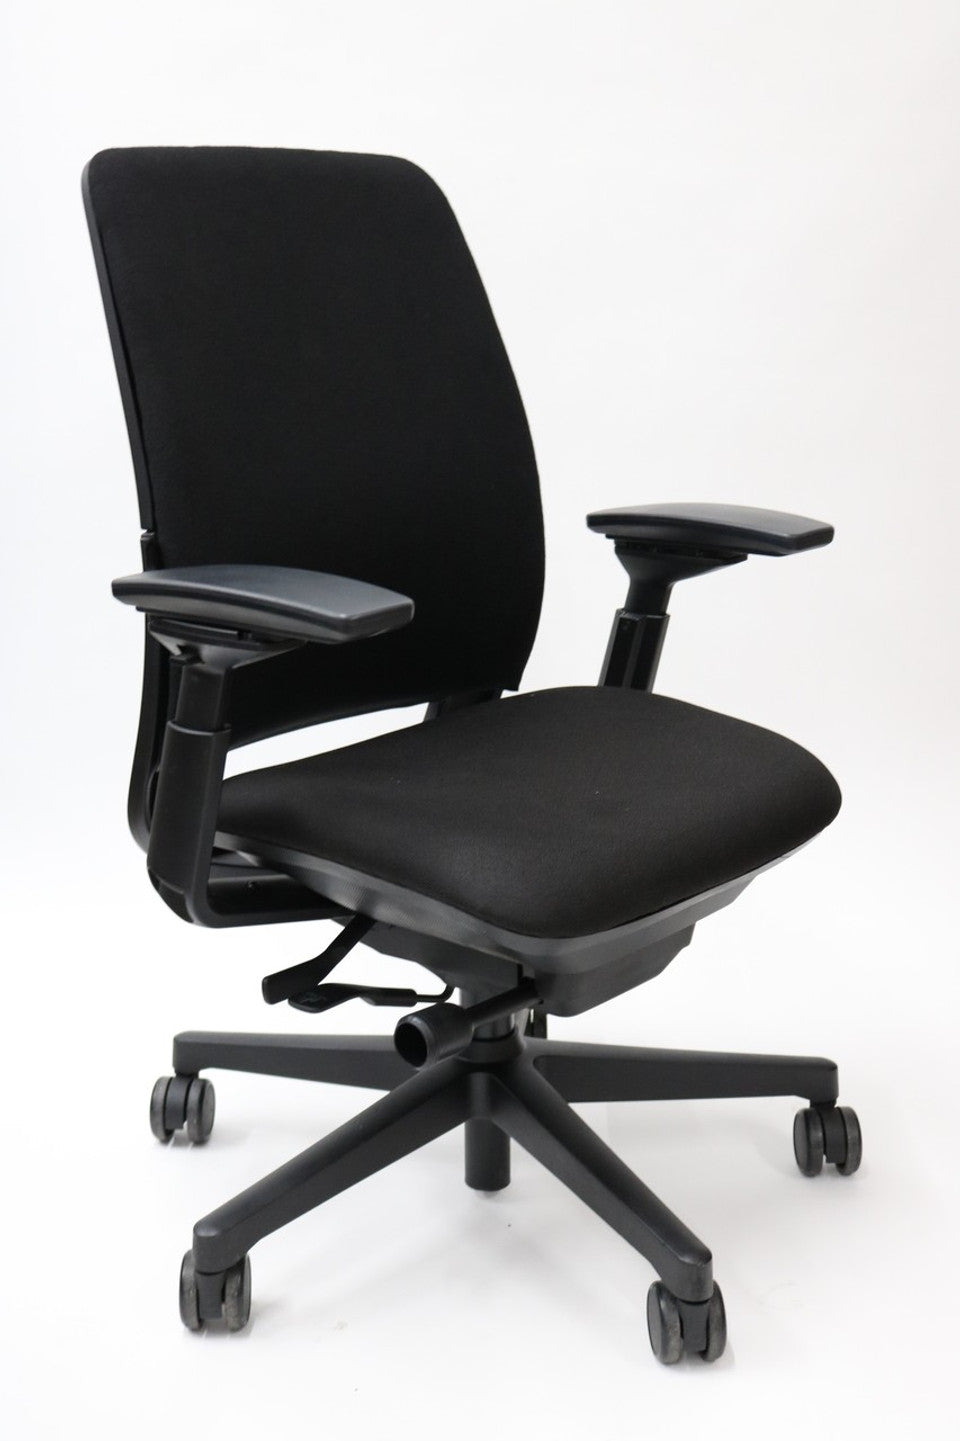 Steelcase Amia with LiveLumbar chair